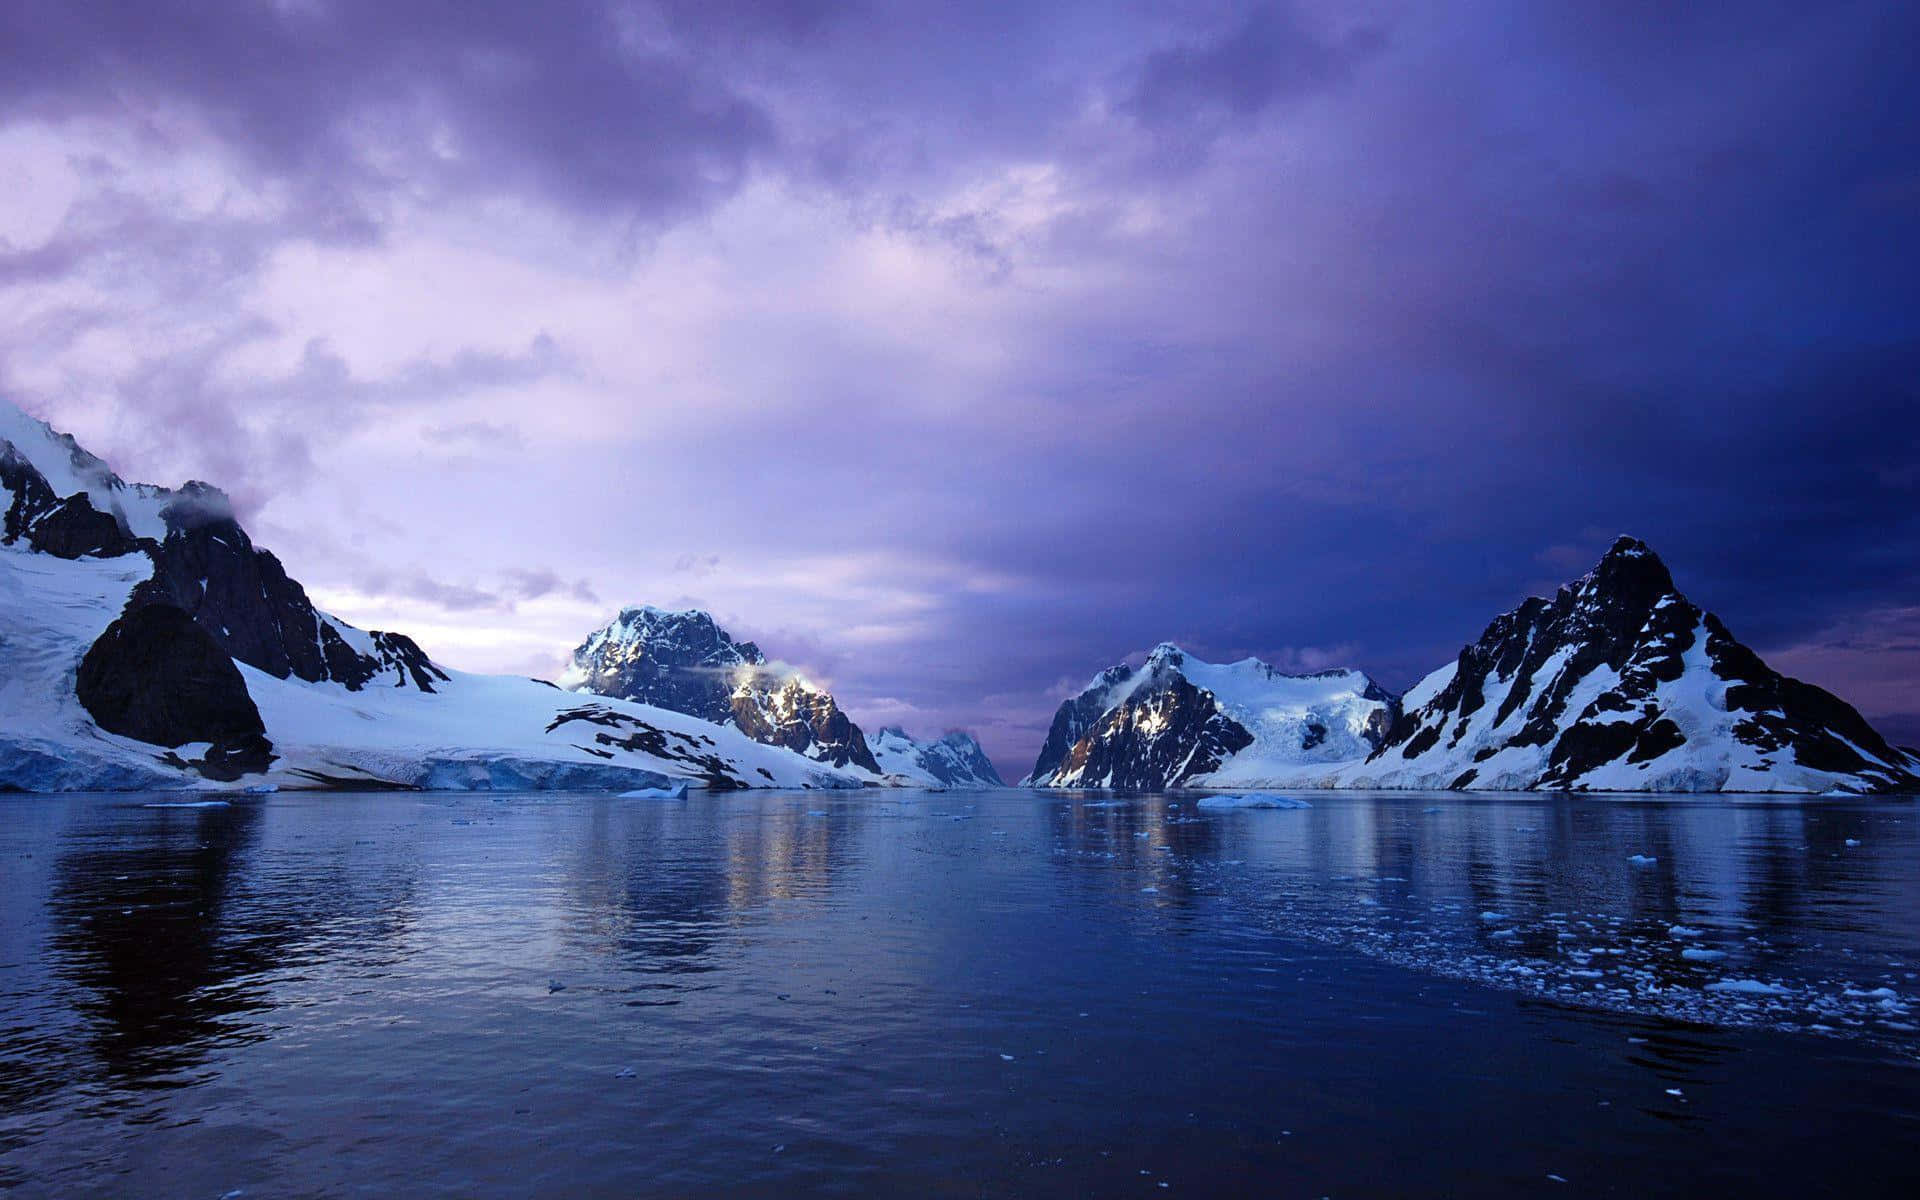 A breathtaking view of Antarctica